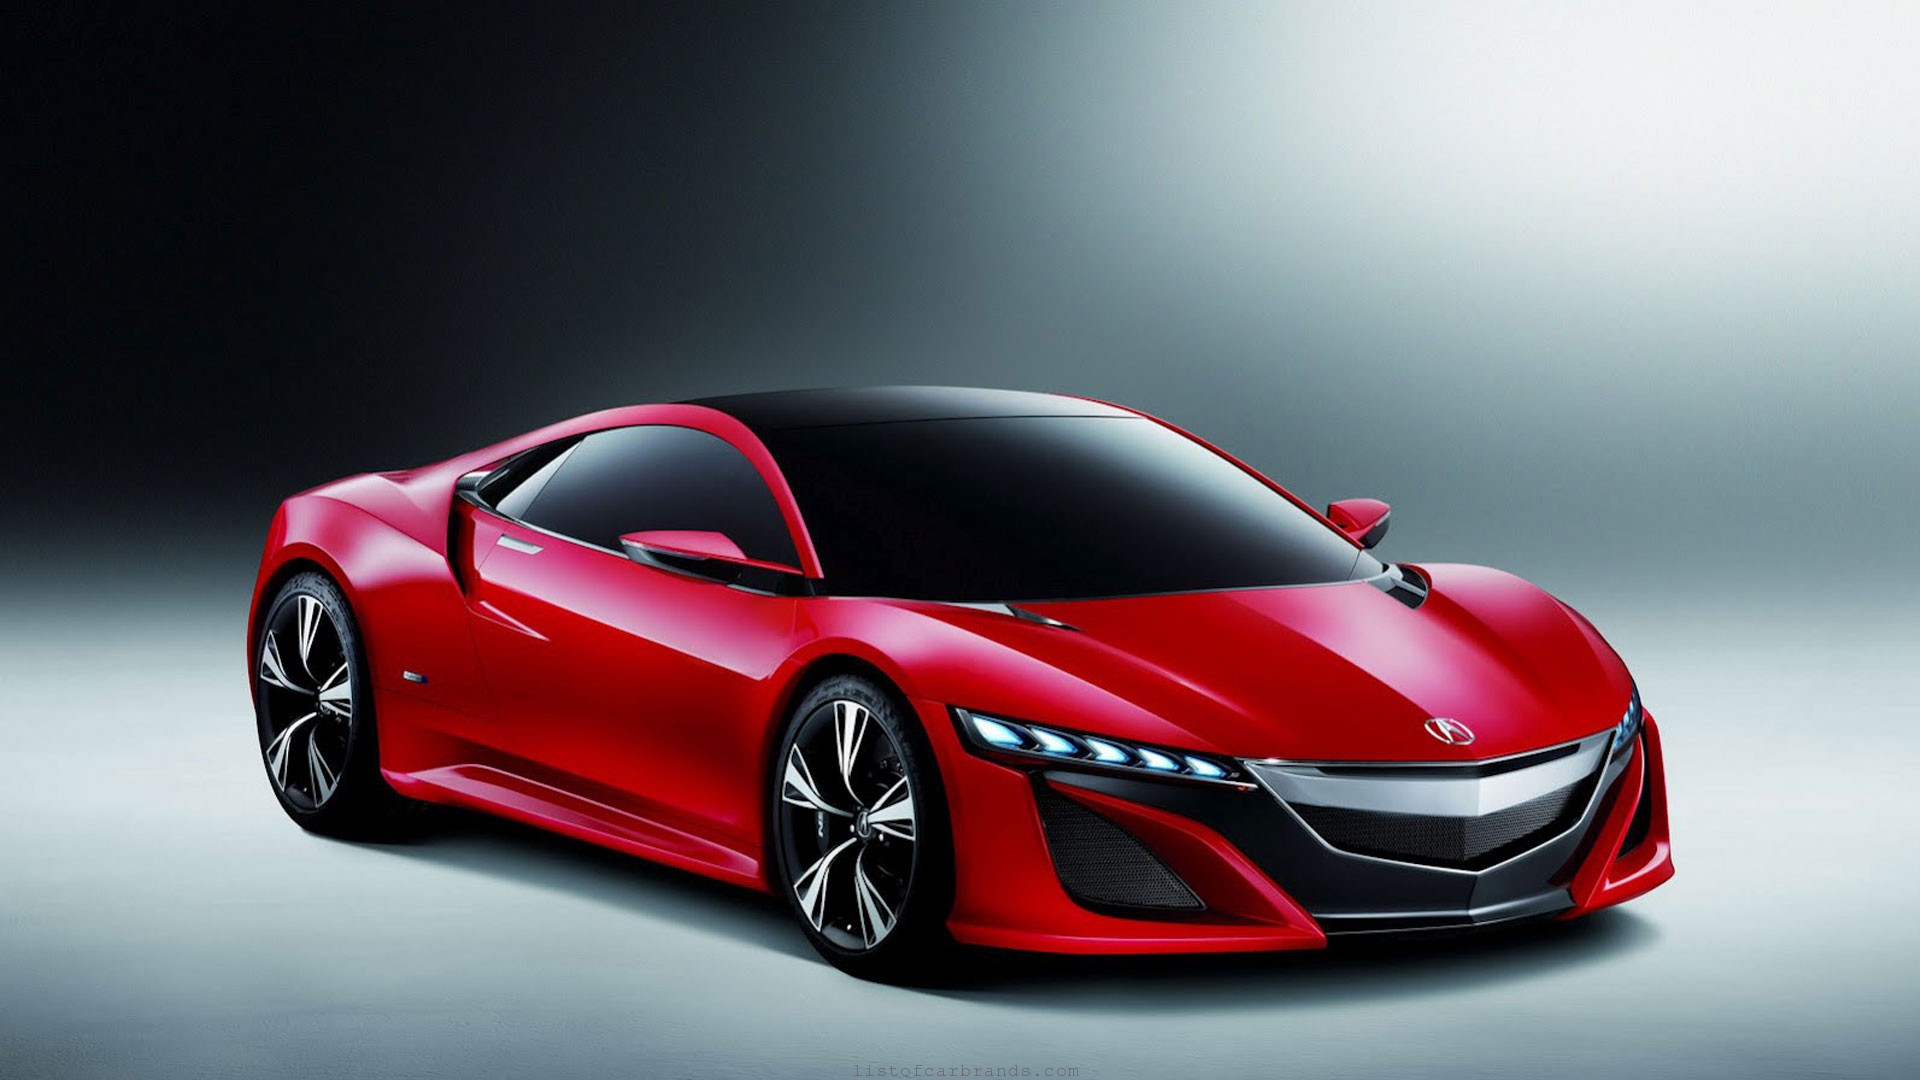 Honda Nsx Wallpaper Widescreen Pictures In High Definition Or